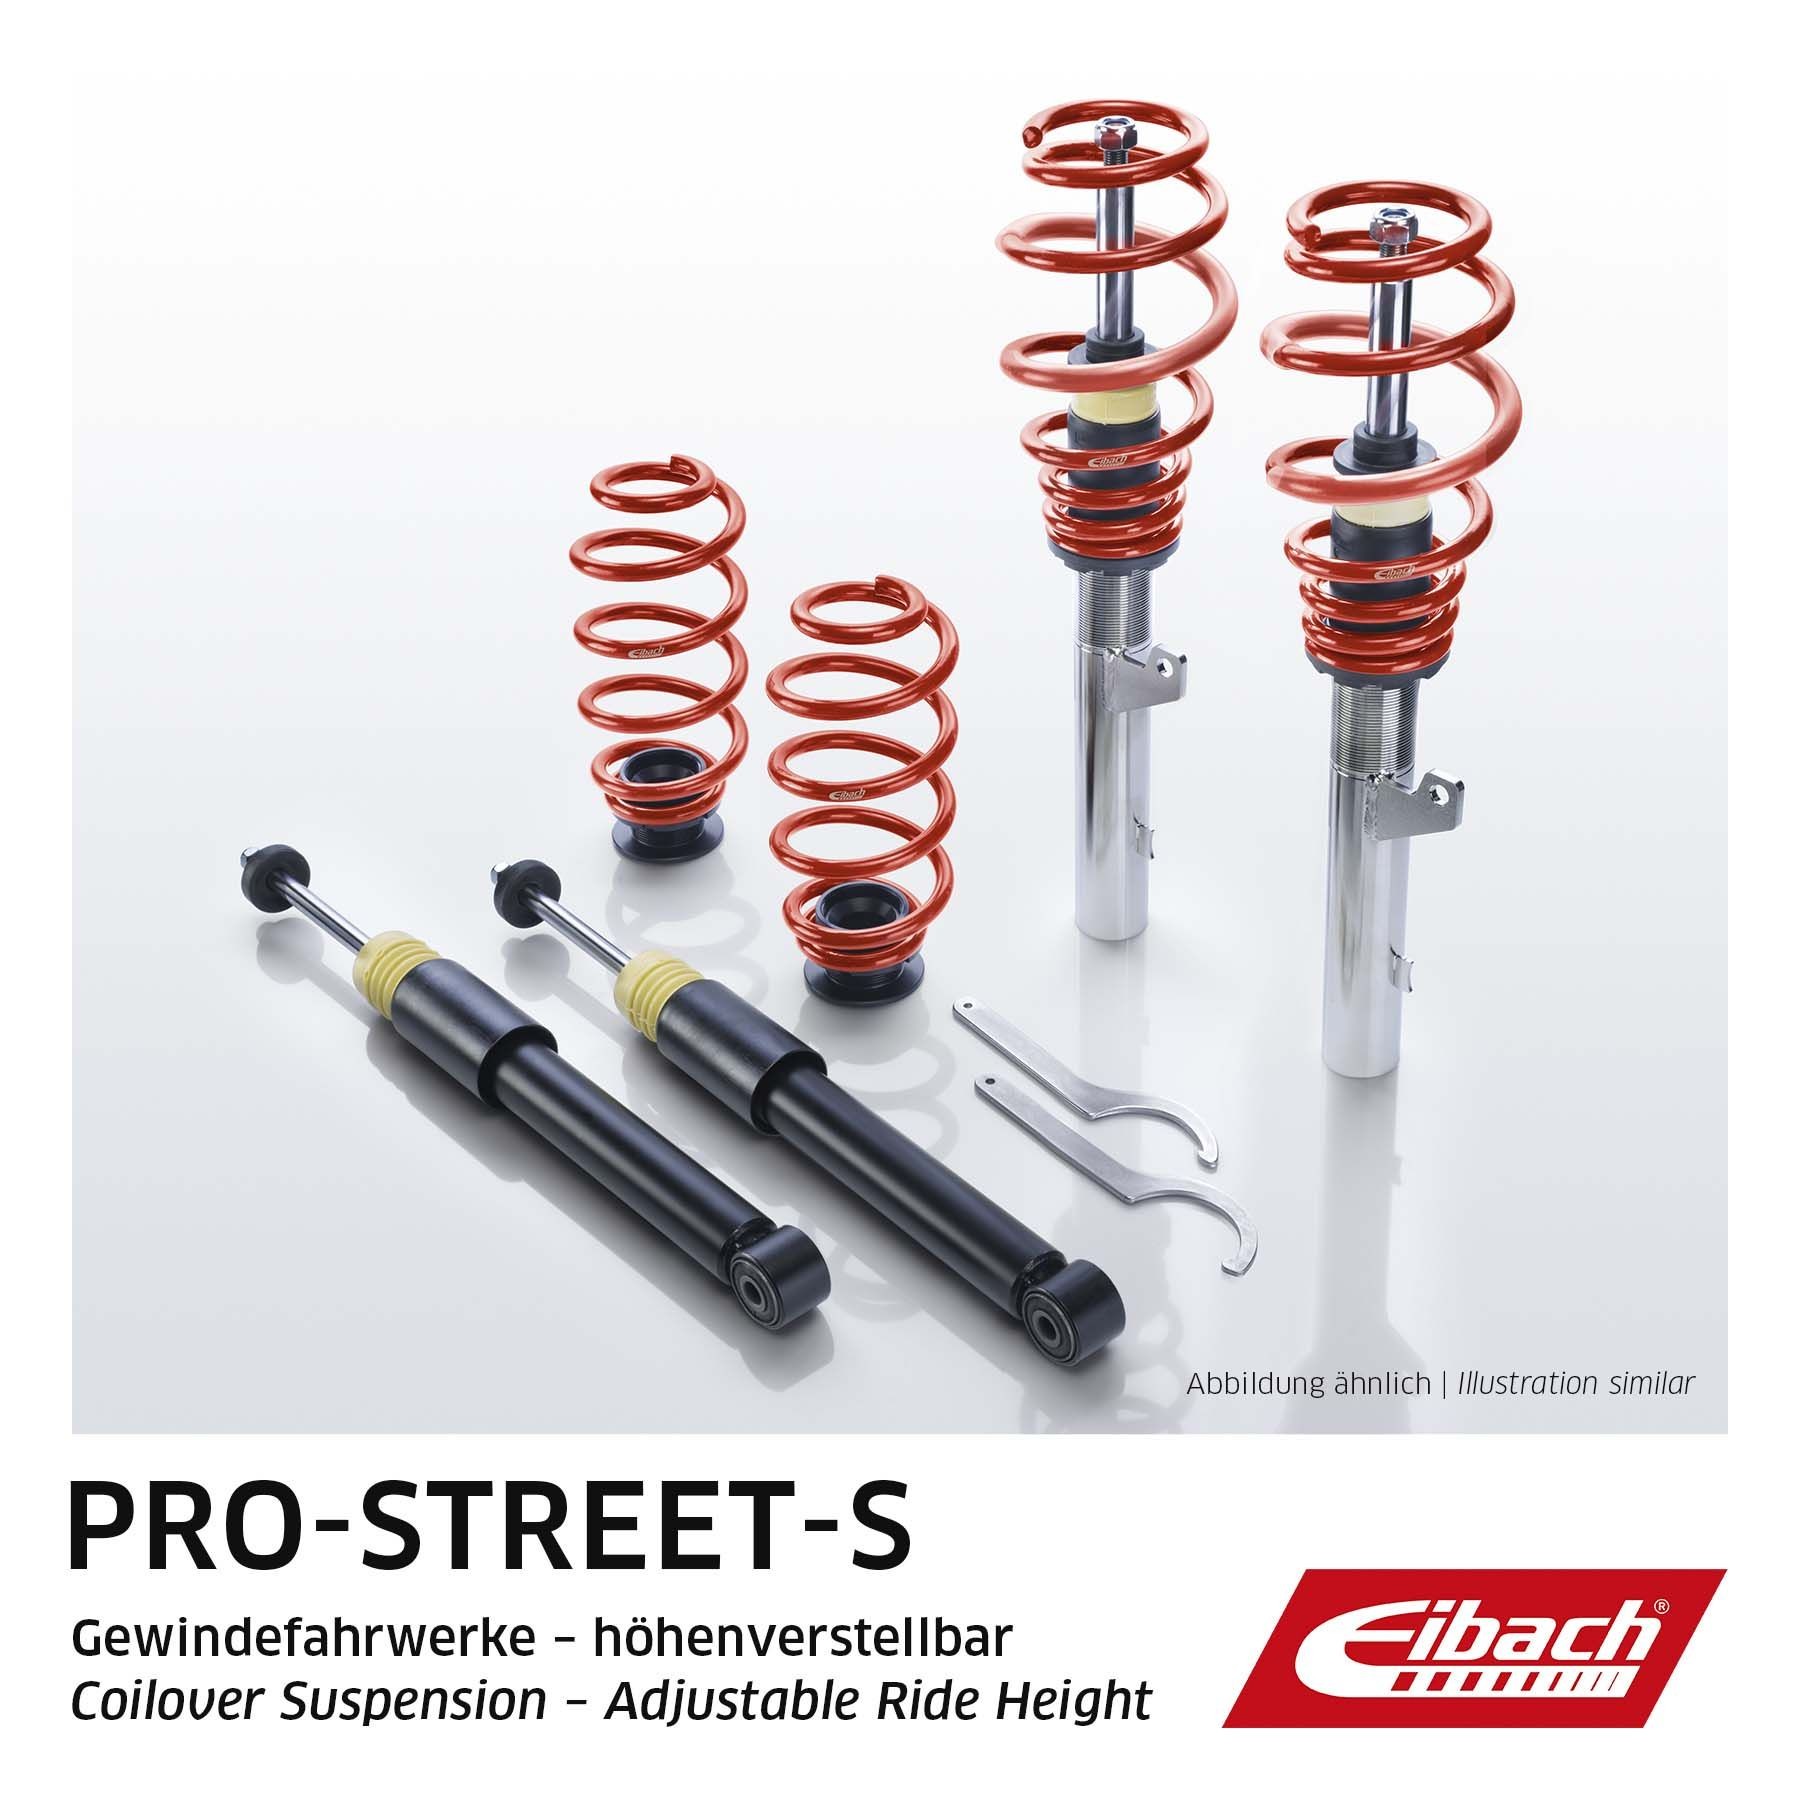 EIBACH PSS65-81-010-02-22 Volkswagen POLO 2019 Suspension kit, coil springs / shock absorbers